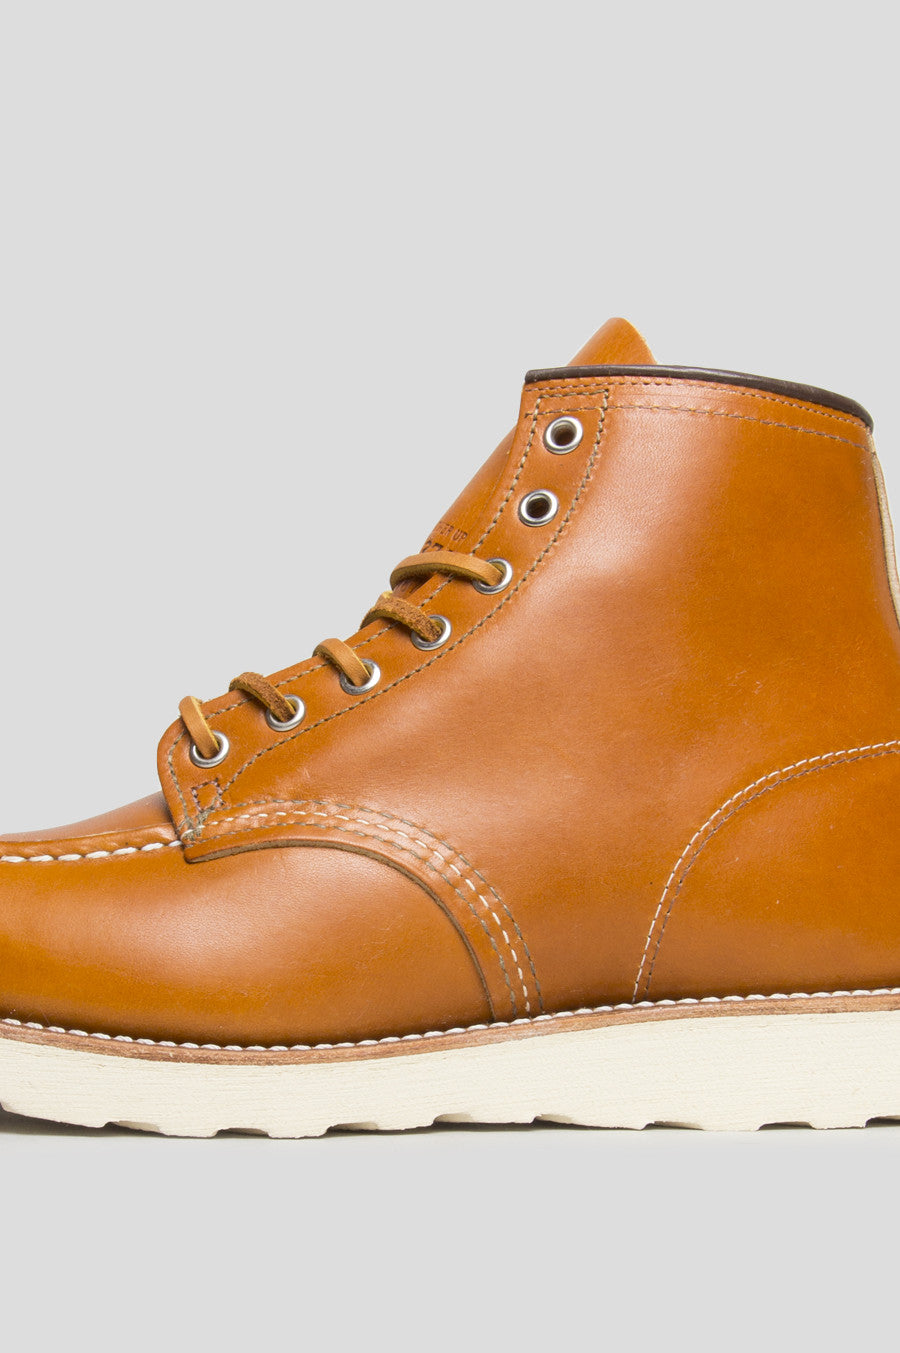 RED WING 6" CLASSIC MOC GOLD RUSSET - BLENDS